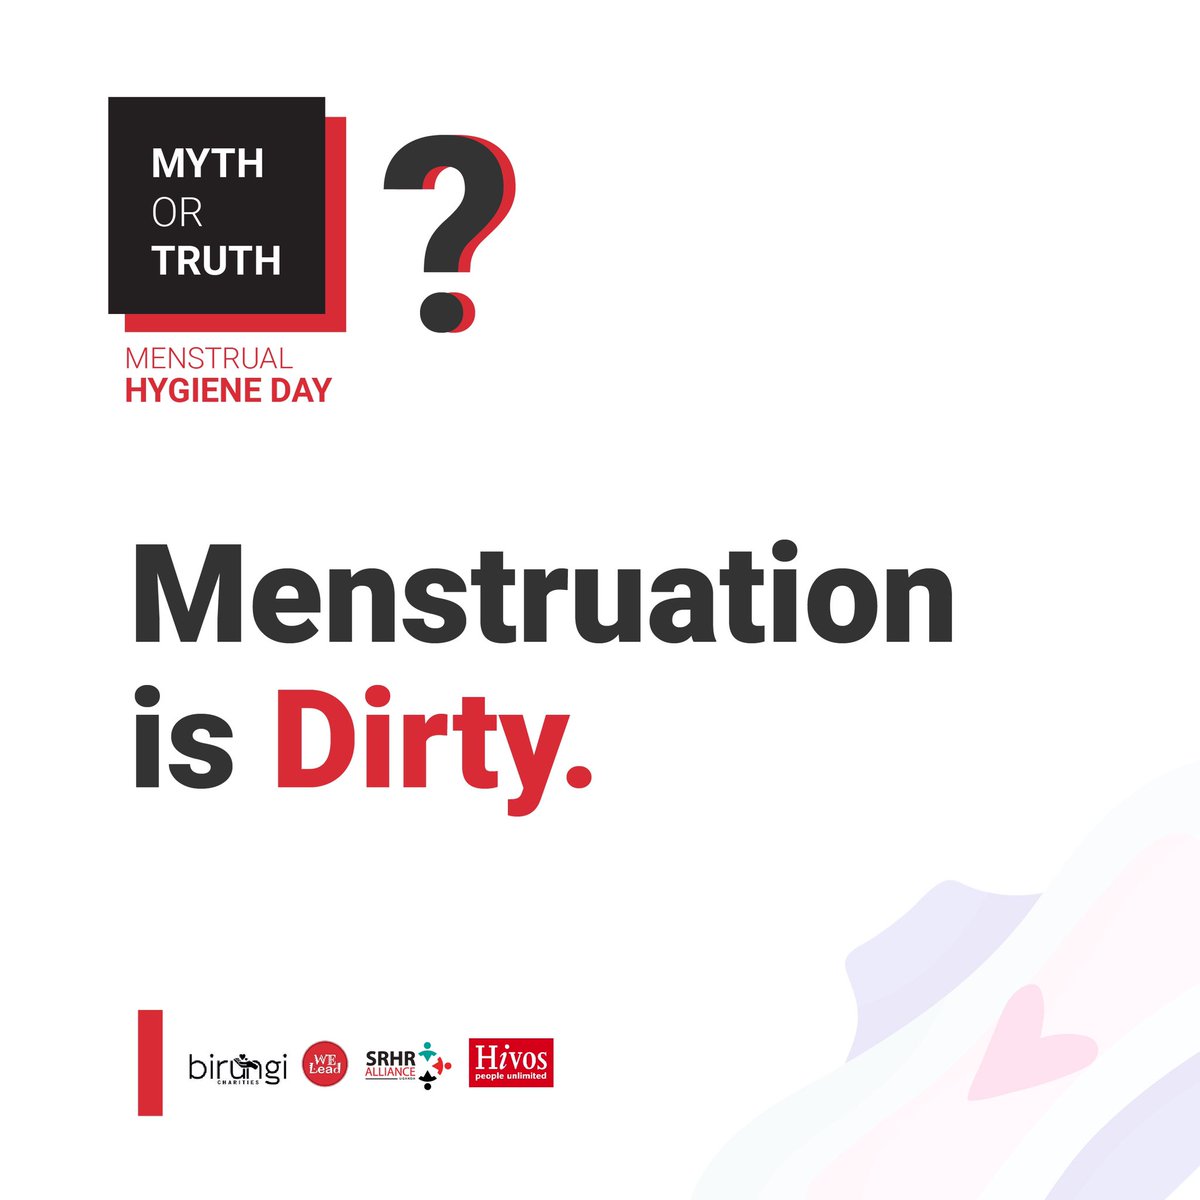 Periods are perfectly normal and not dirty!

Period blood contains no toxins, the uterus lining must clean enough to nurture an embryo, and therefore cannot be toxic.

#HealthyPeriod4Her 
#WeAreCommitted 
#WeLeadOurSRHR